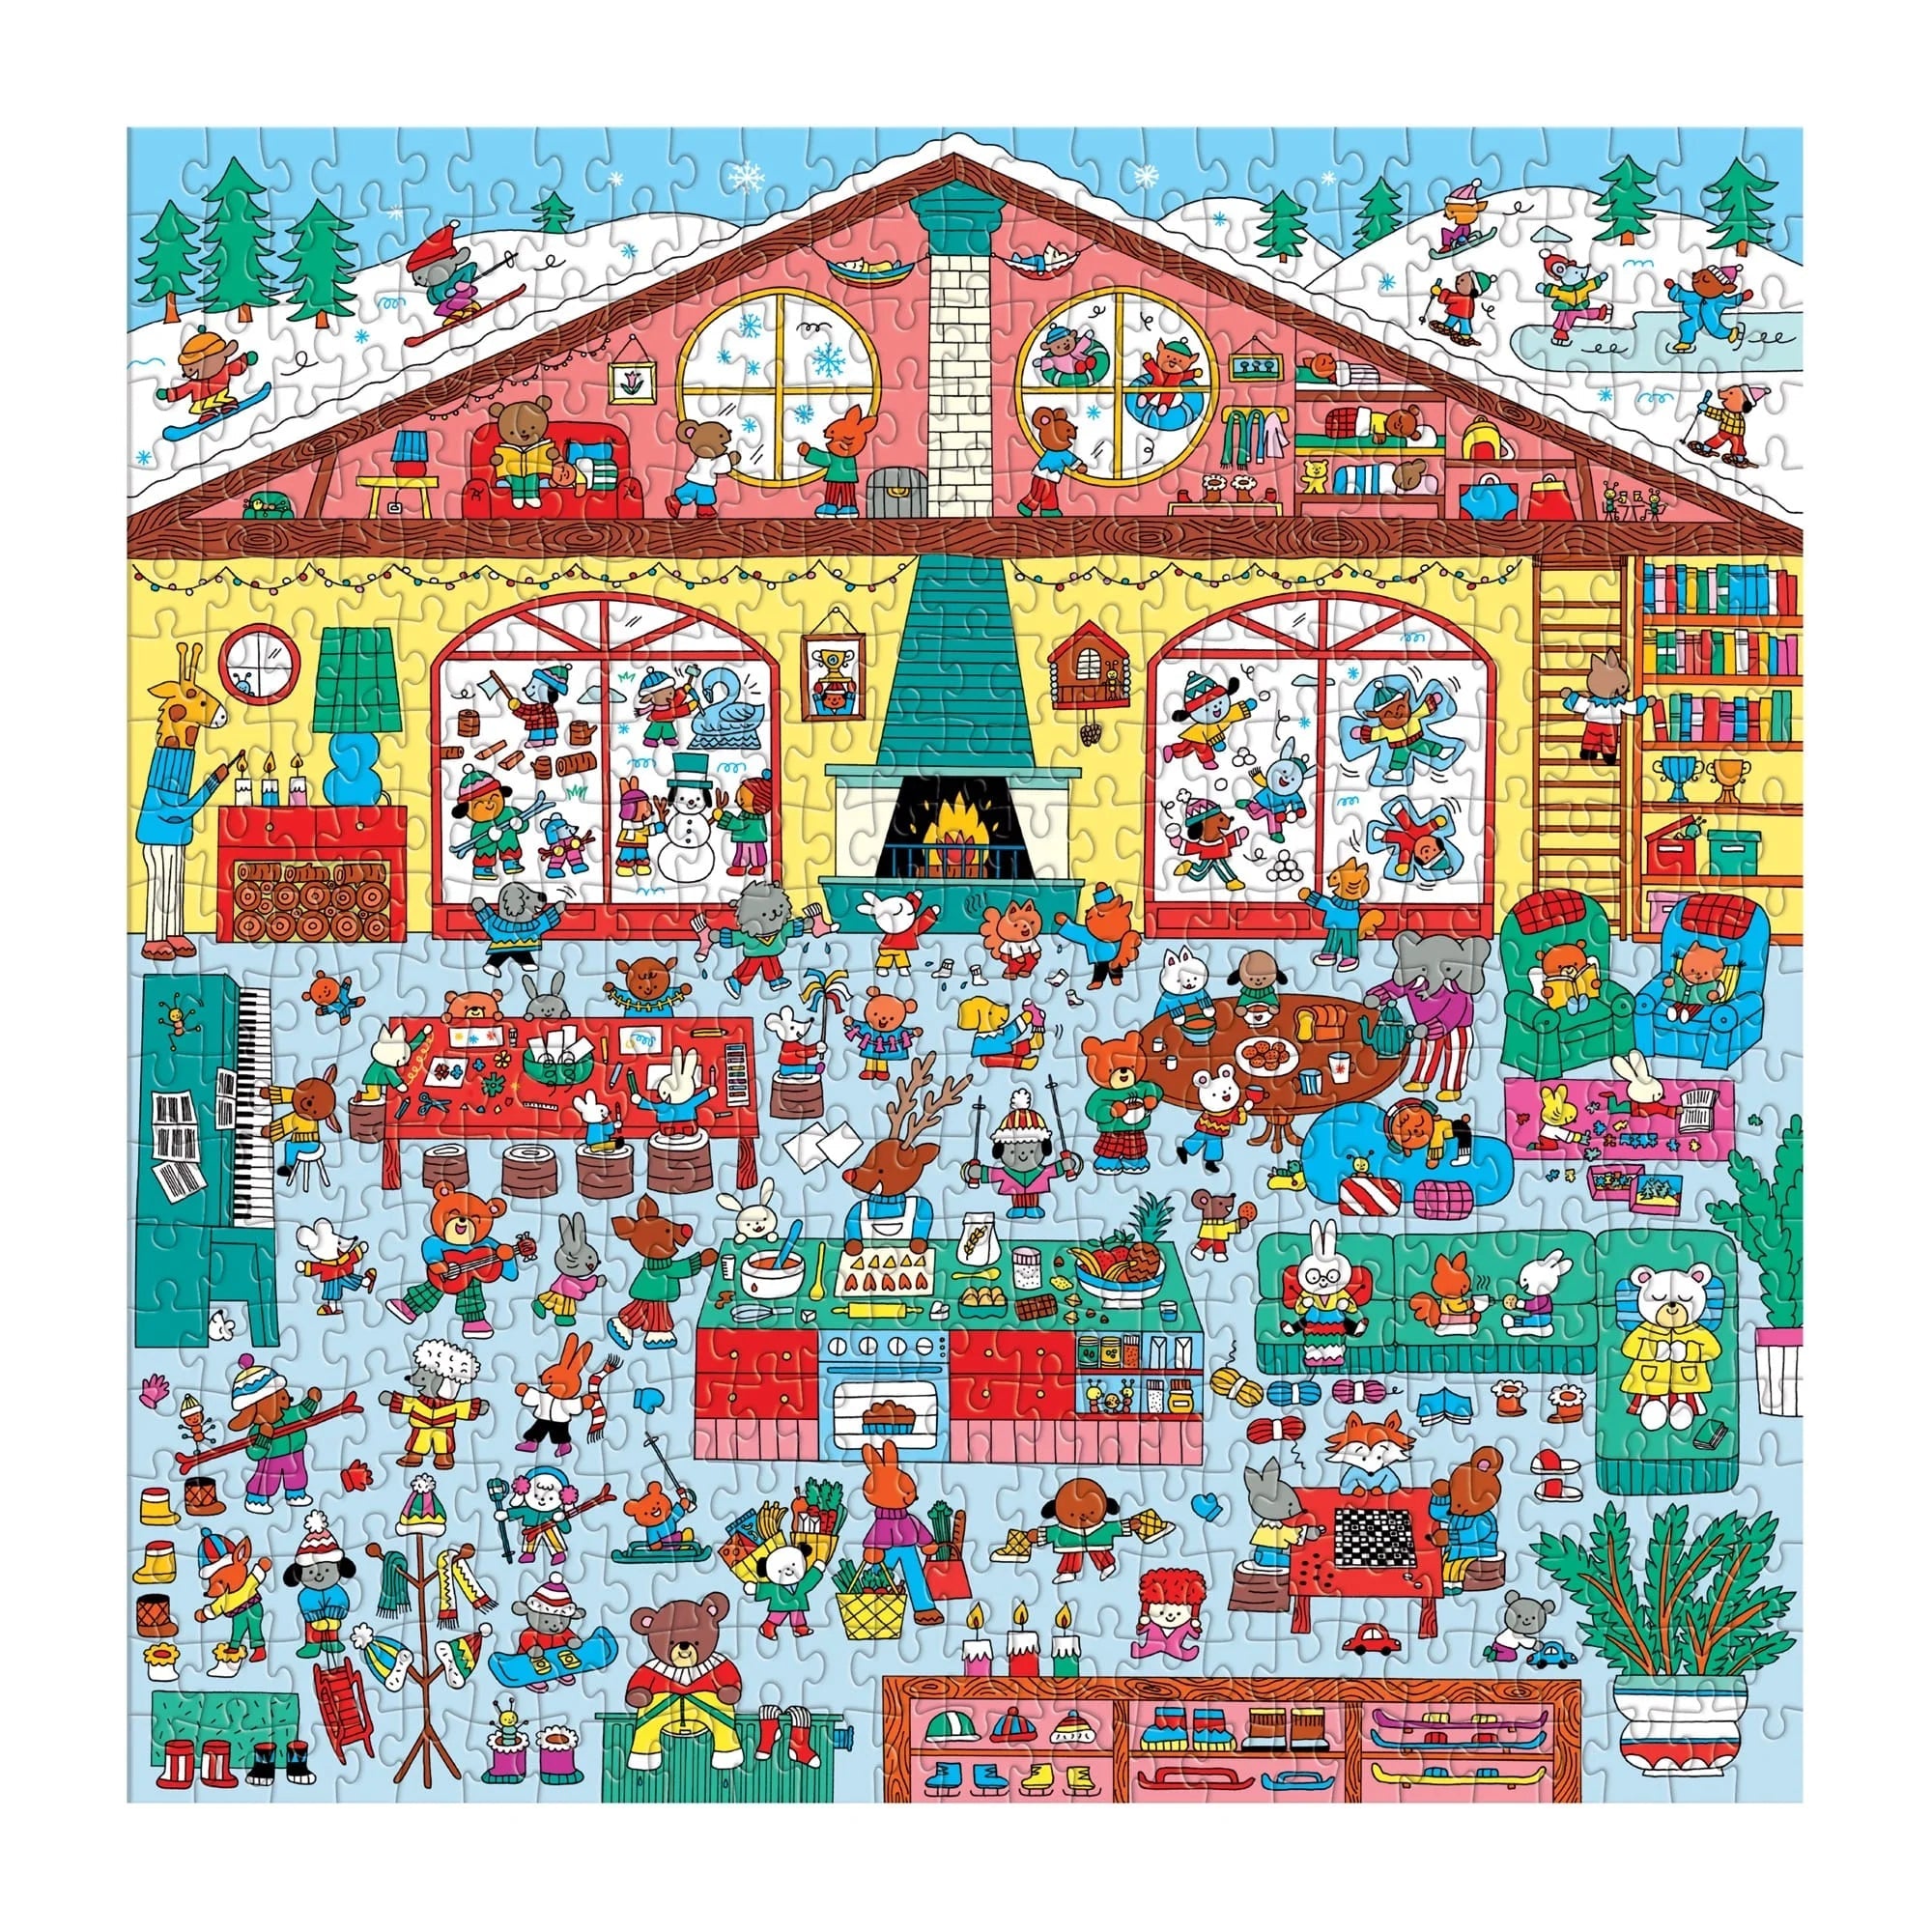 500 Piece Puzzle -- Search and Find Winter Chalet